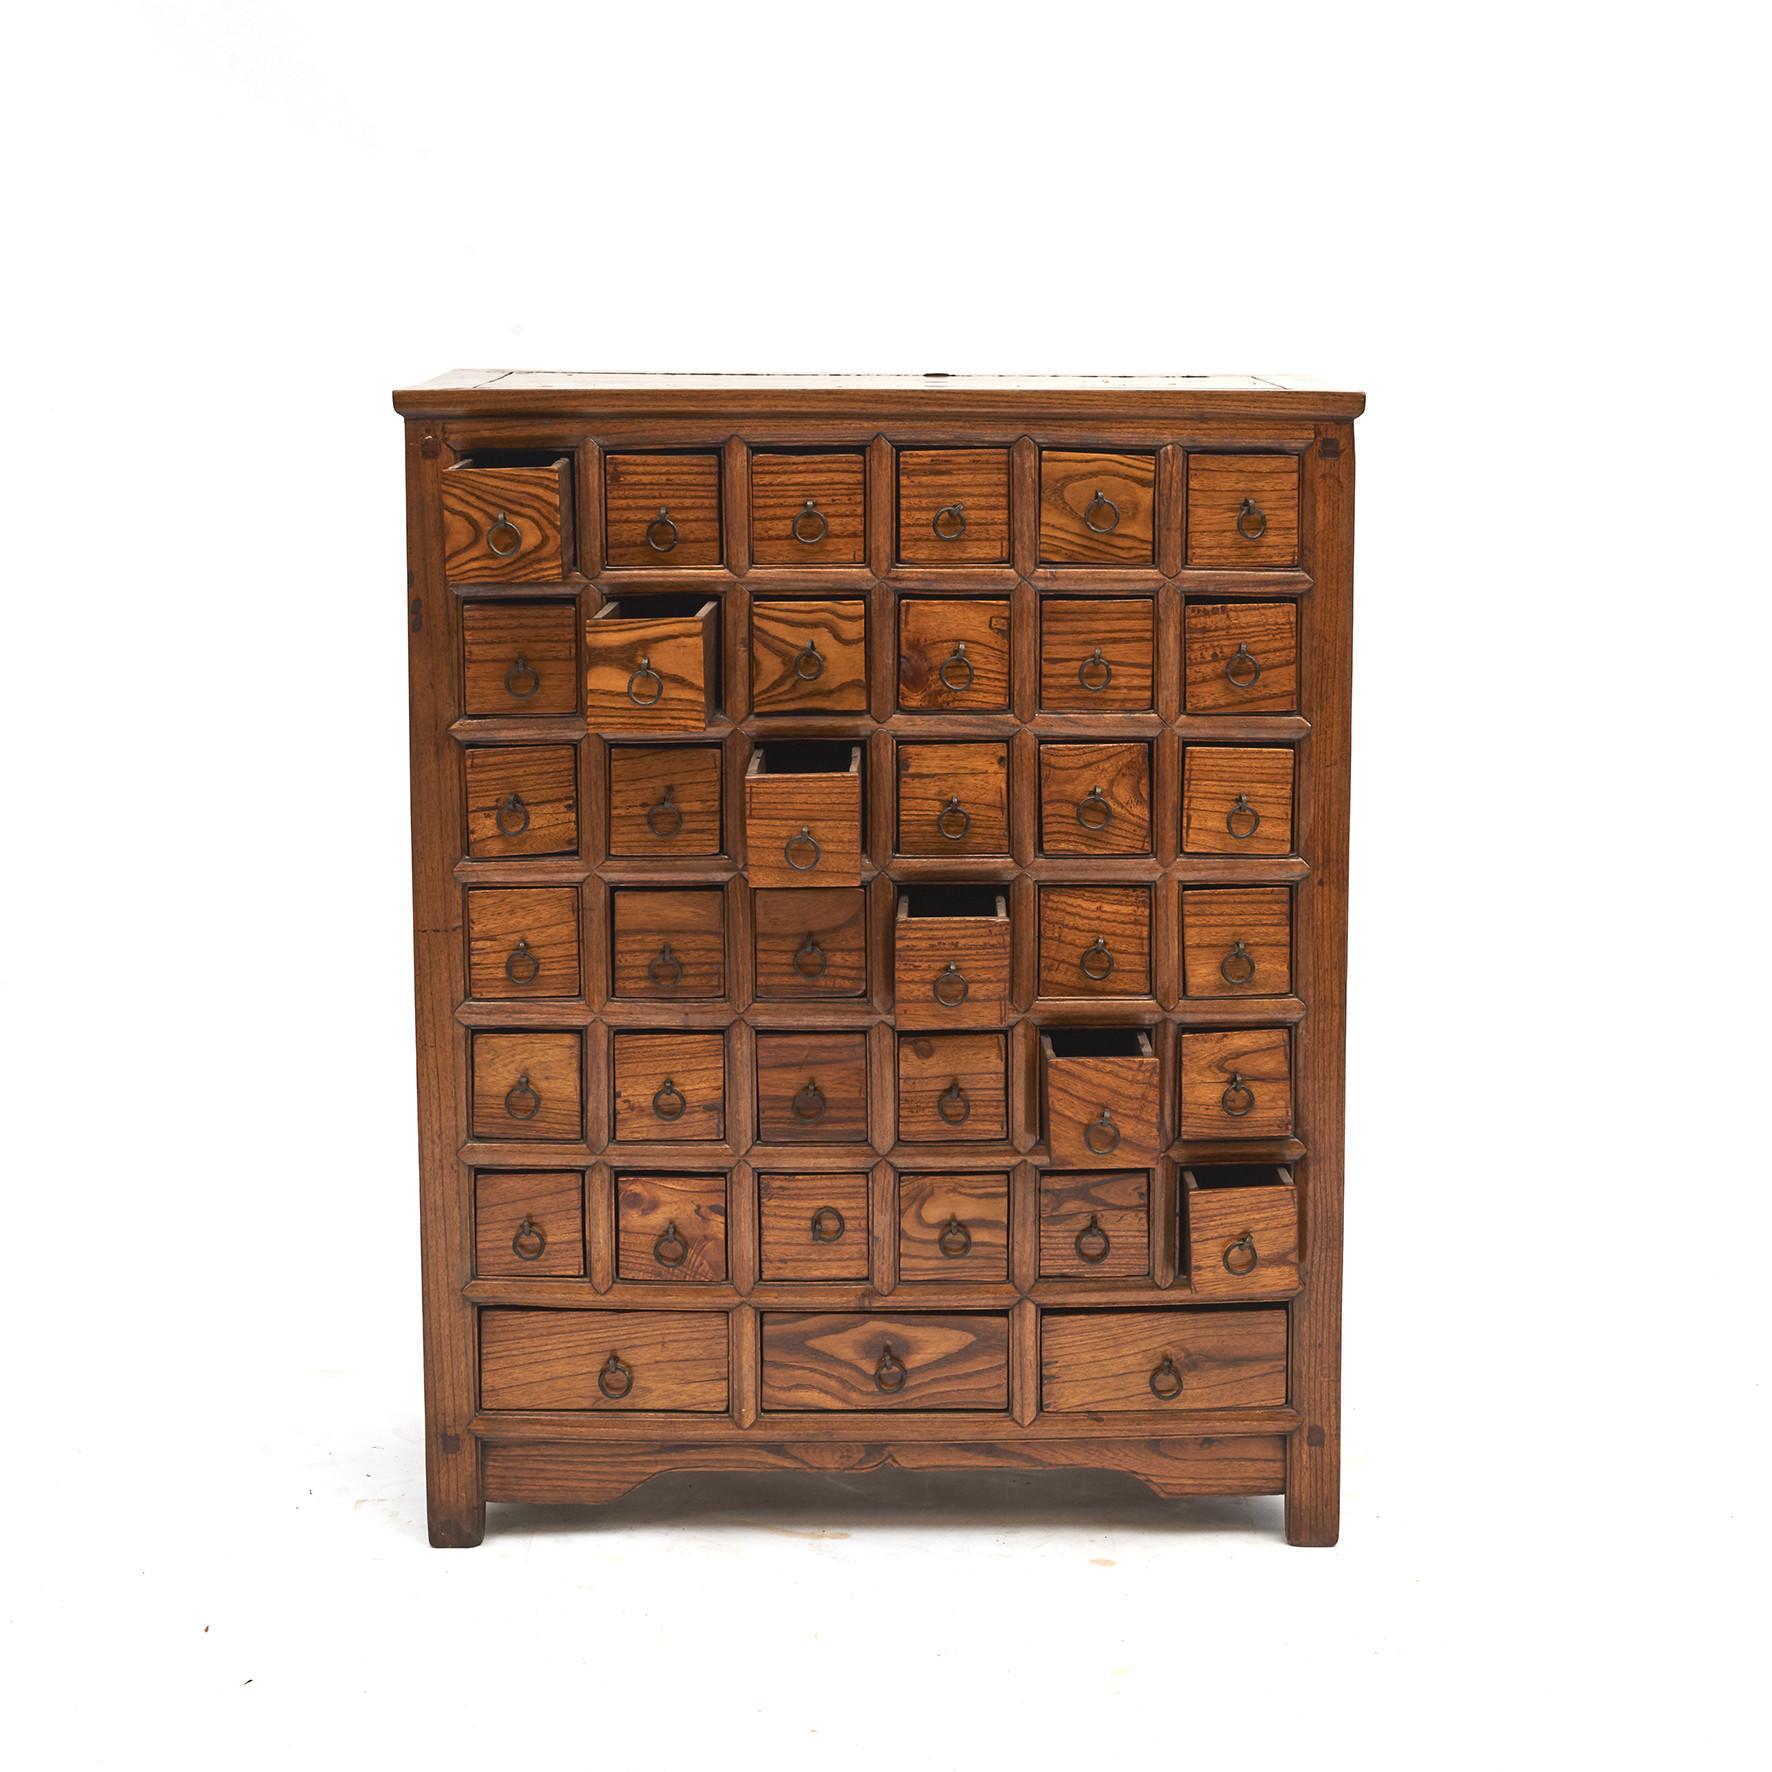 Chinese elm apothecary / pharmacy medicine chest with 39 drawers.
From Suzhou, China, 1860-1880.